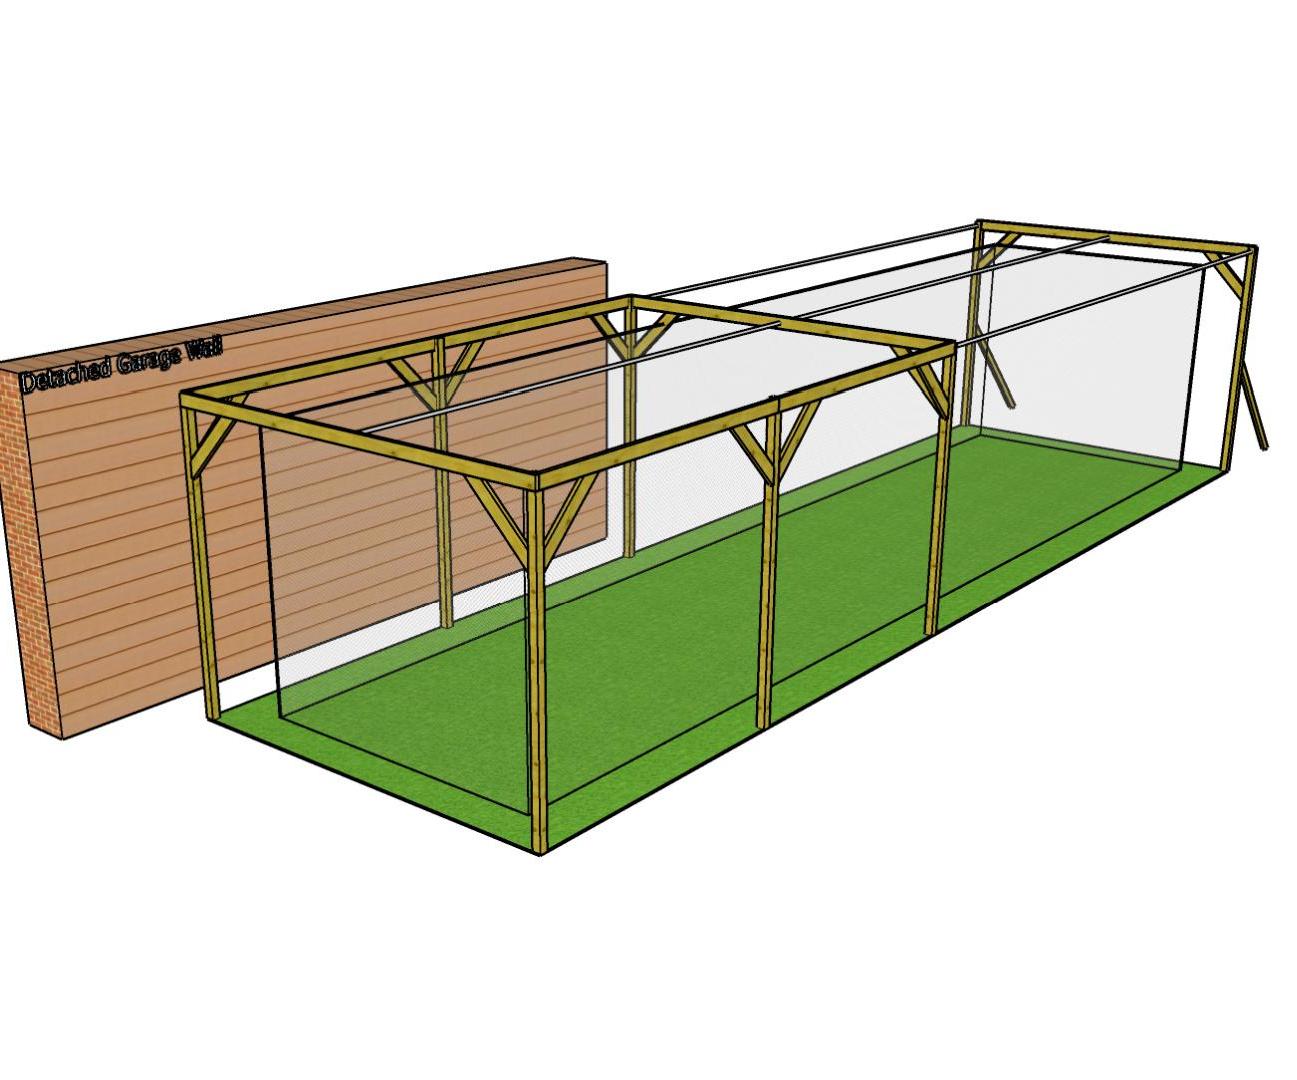 How to Build a Batting Cage in Backyard